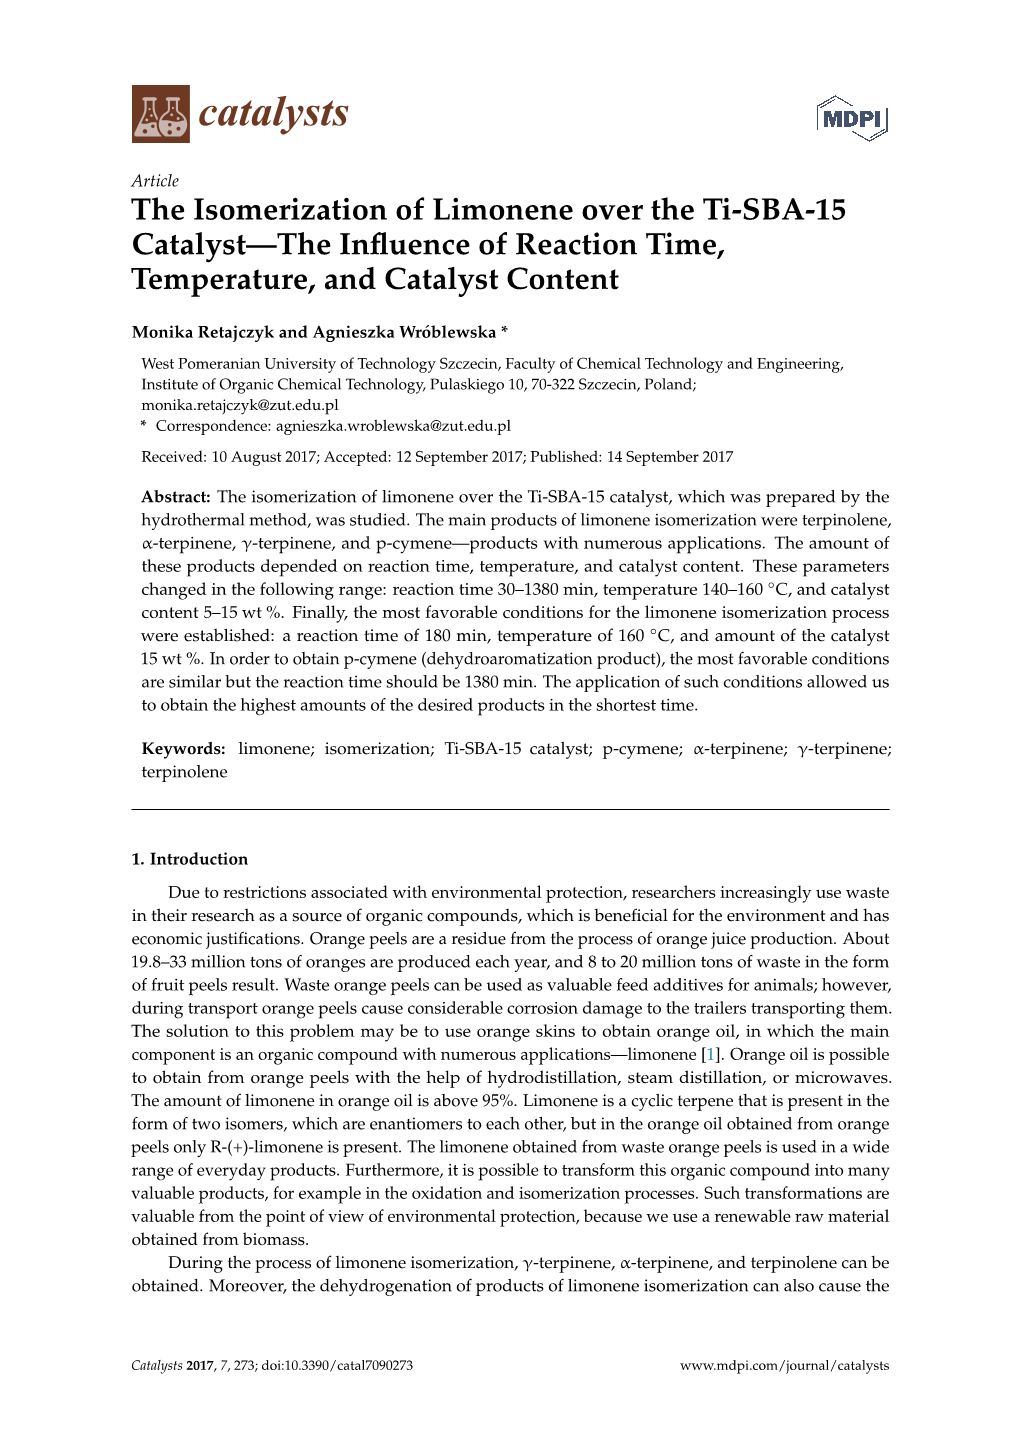 The Isomerization of Limonene Over the Ti-SBA-15 Catalyst—The Inﬂuence of Reaction Time, Temperature, and Catalyst Content